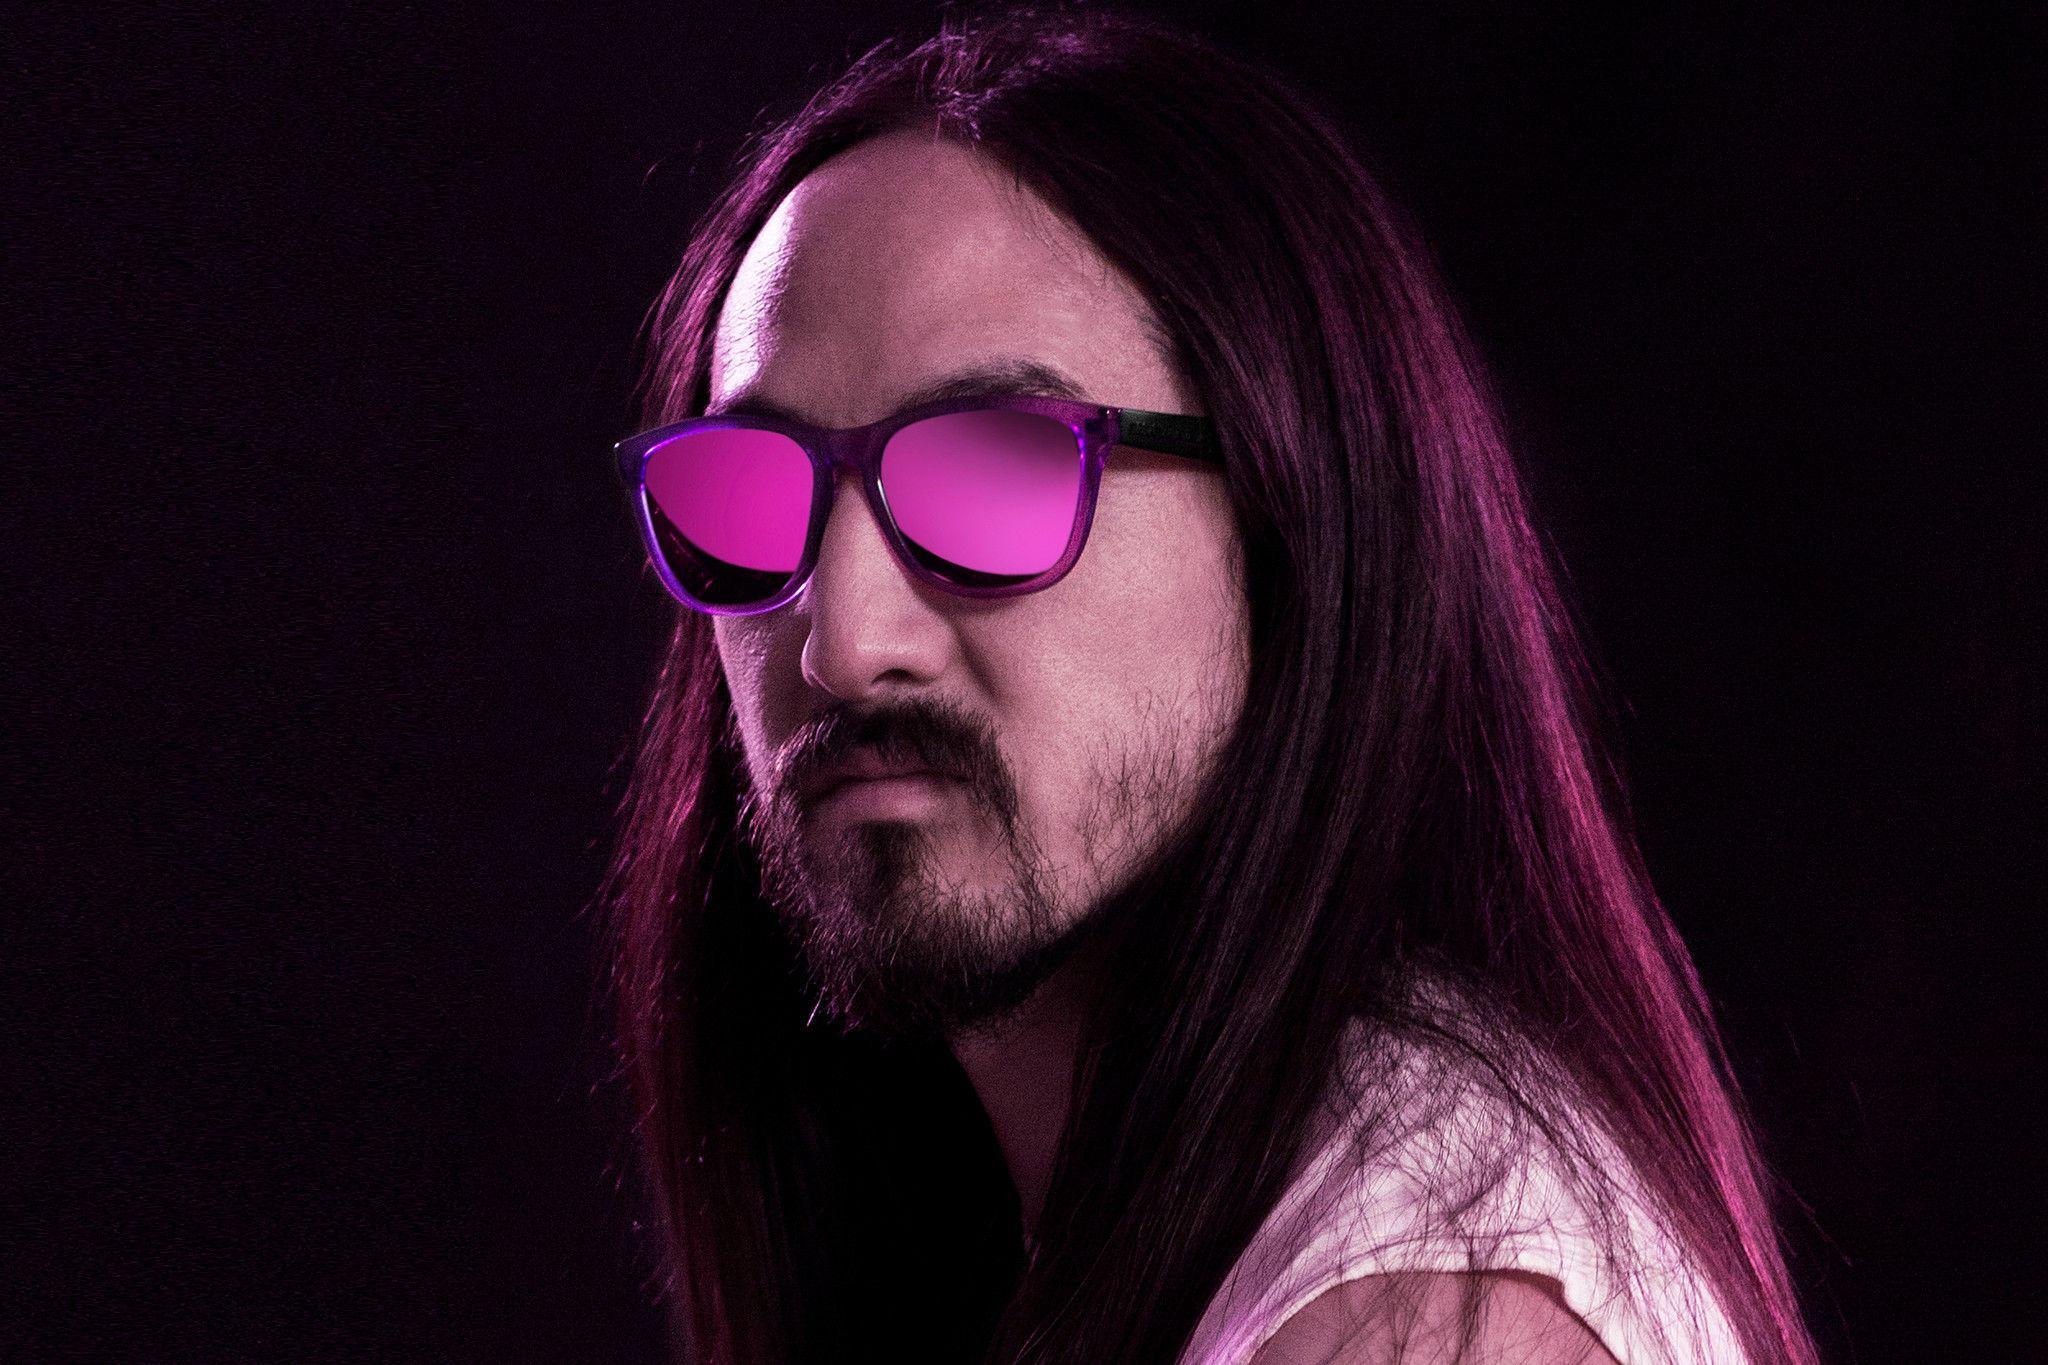 Steve Aoki Wallpaper Image Photo Picture Background